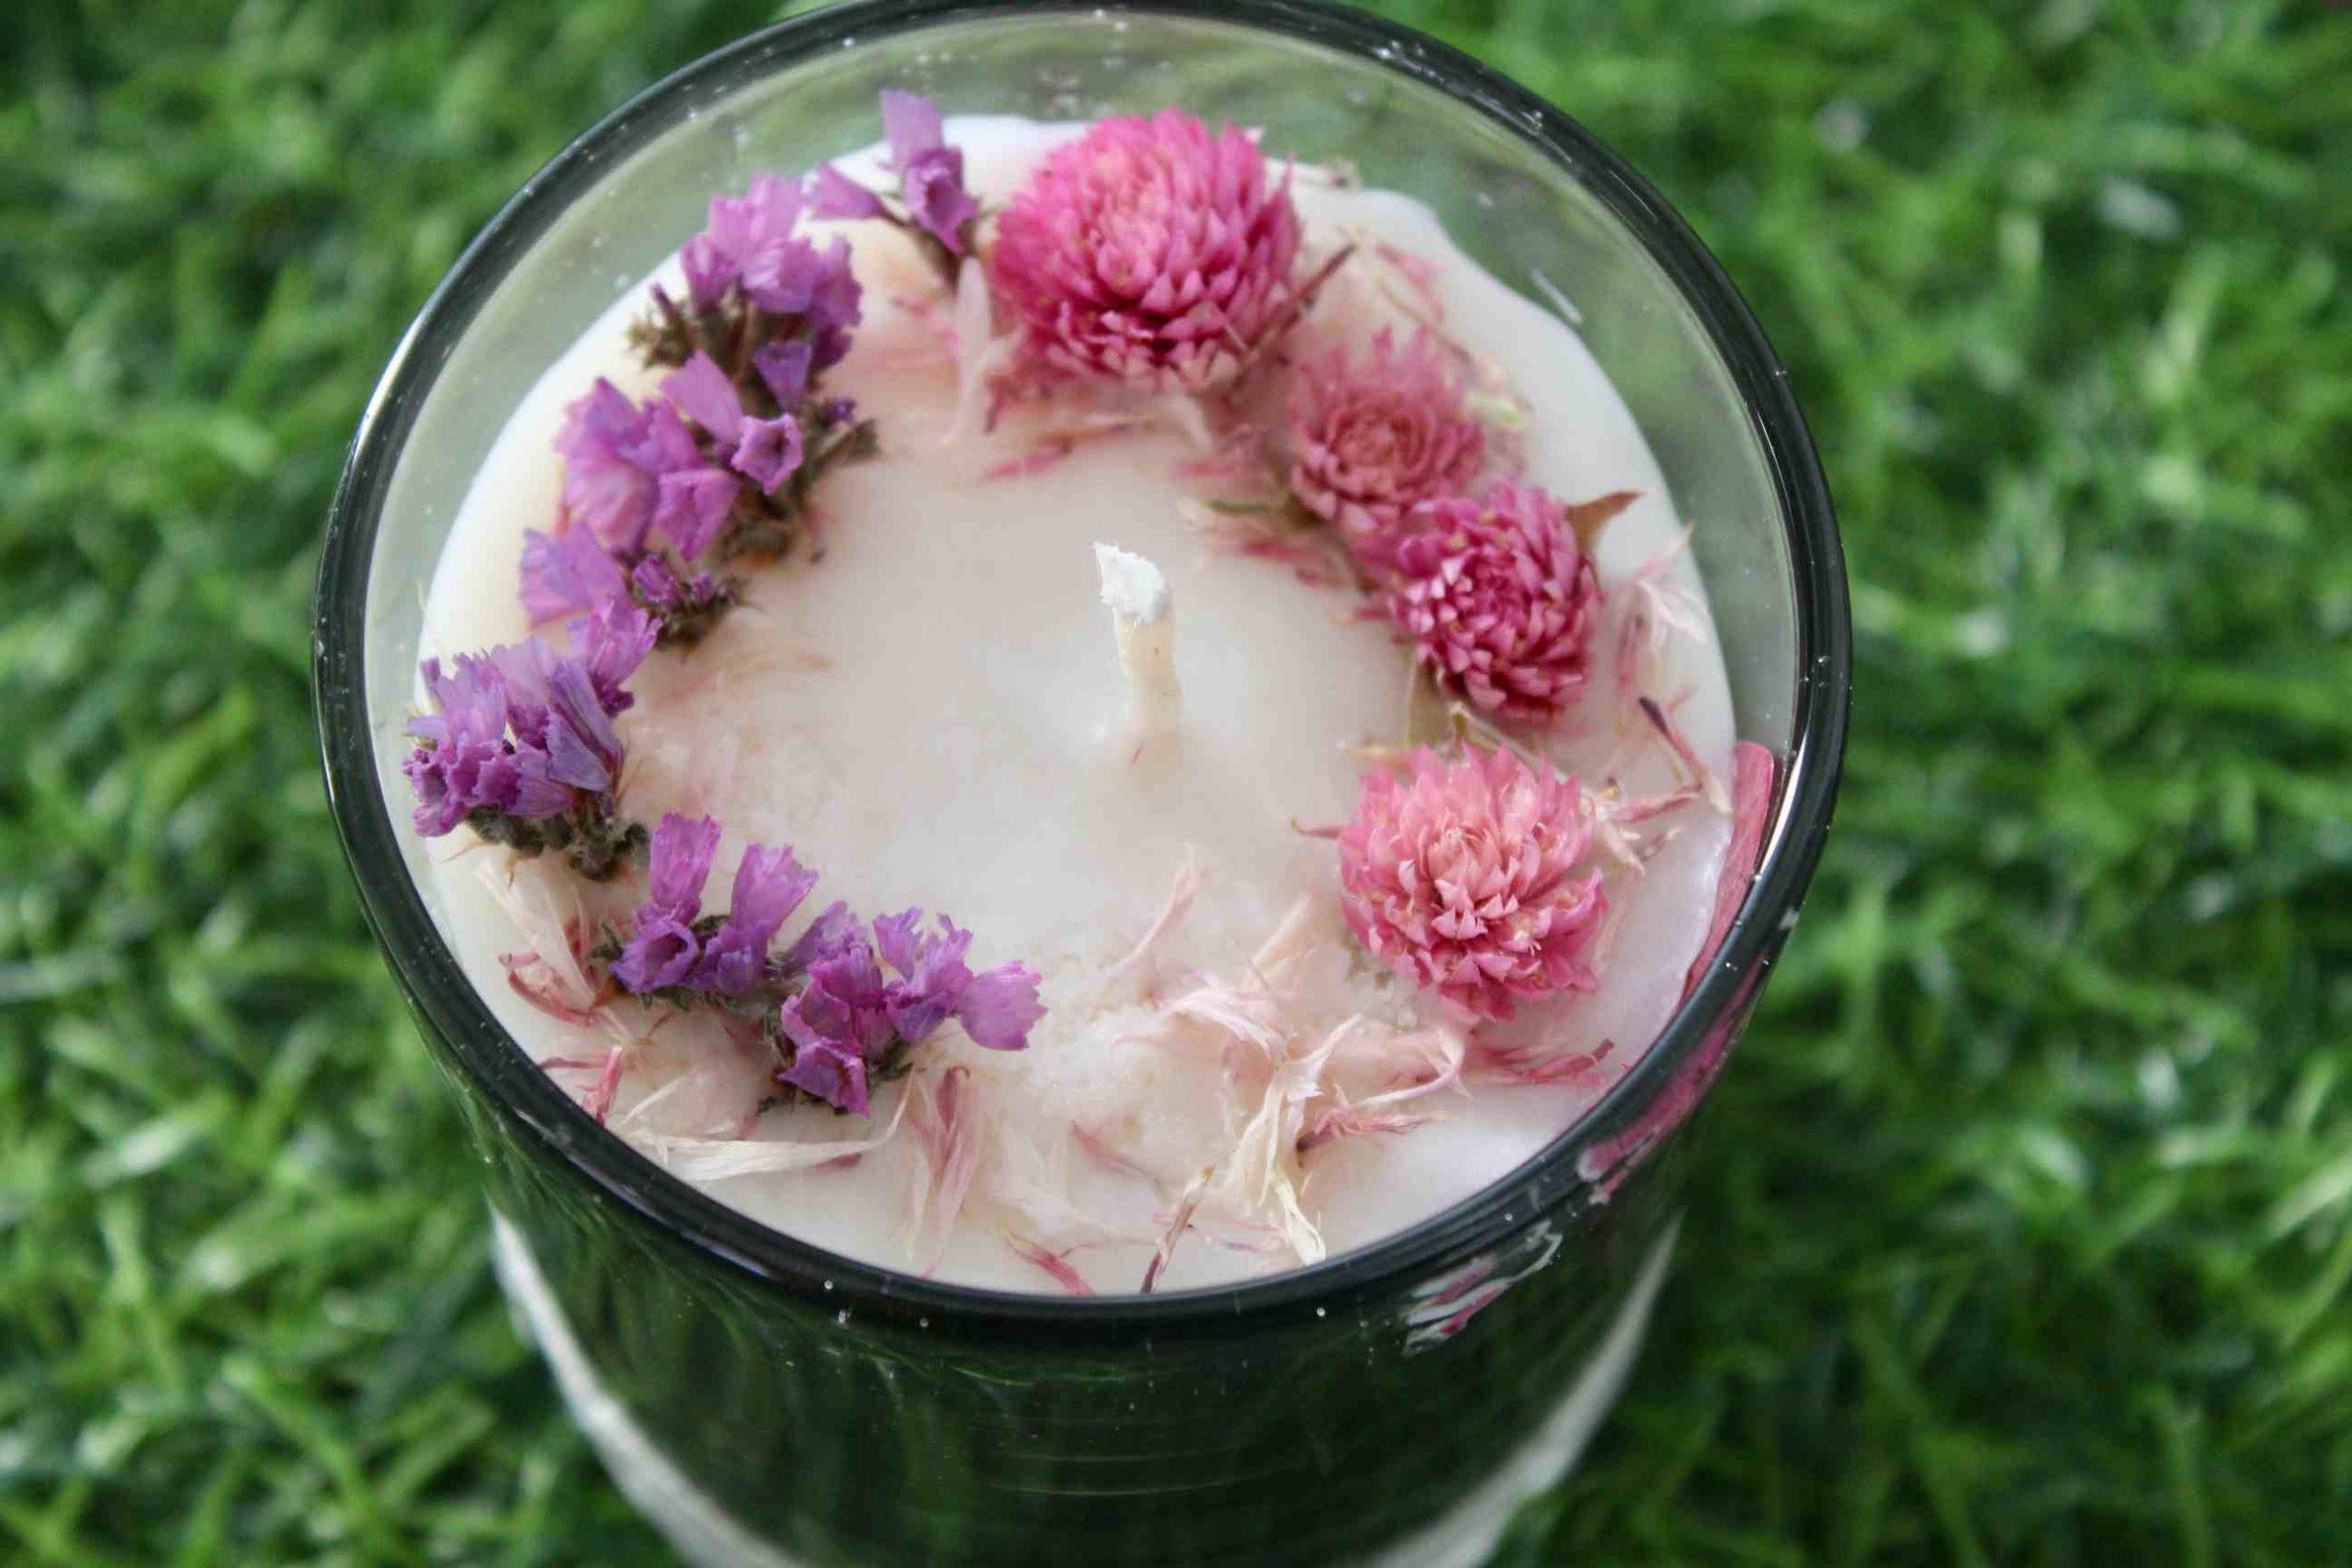 Wreath & Dried flower candles in glass